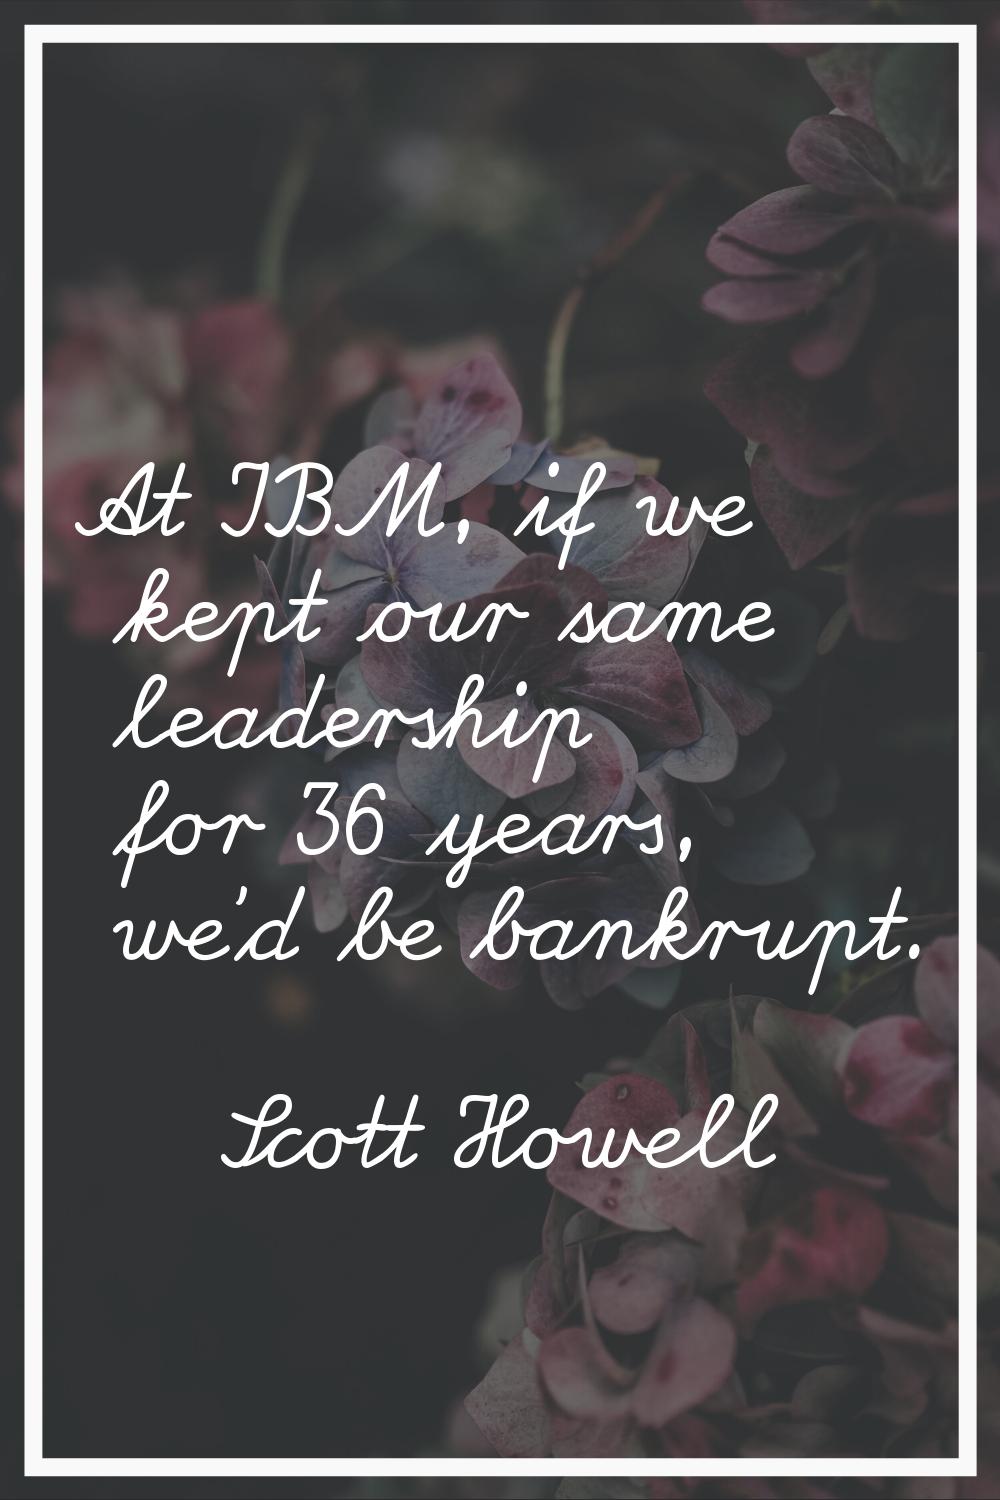 At IBM, if we kept our same leadership for 36 years, we'd be bankrupt.